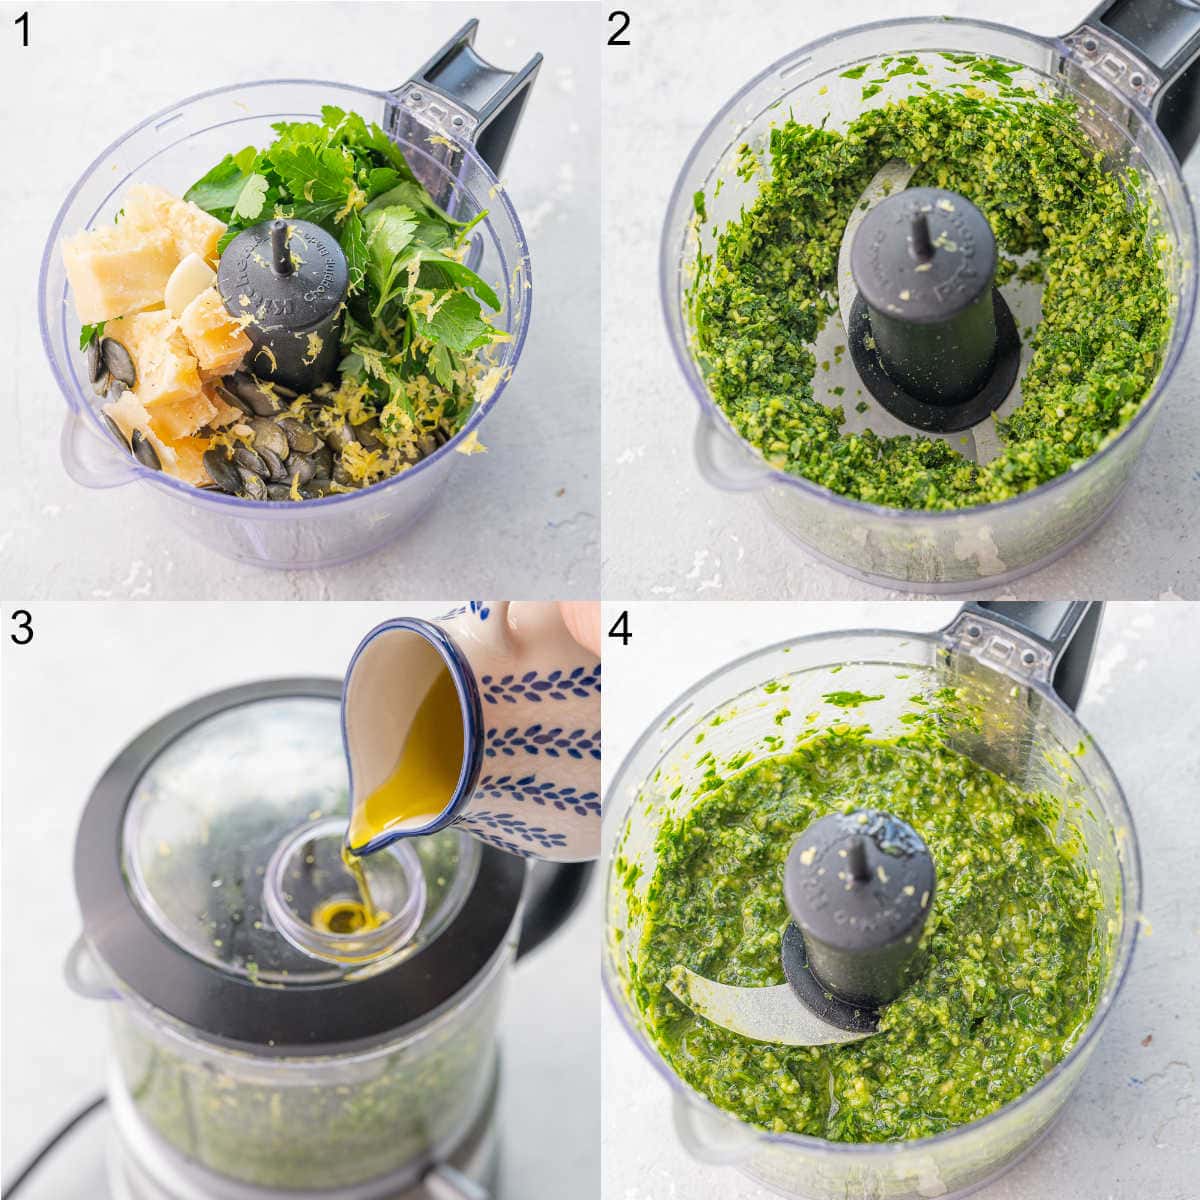 A collage of 4 photos showing how to prepare parsley pesto step by step.